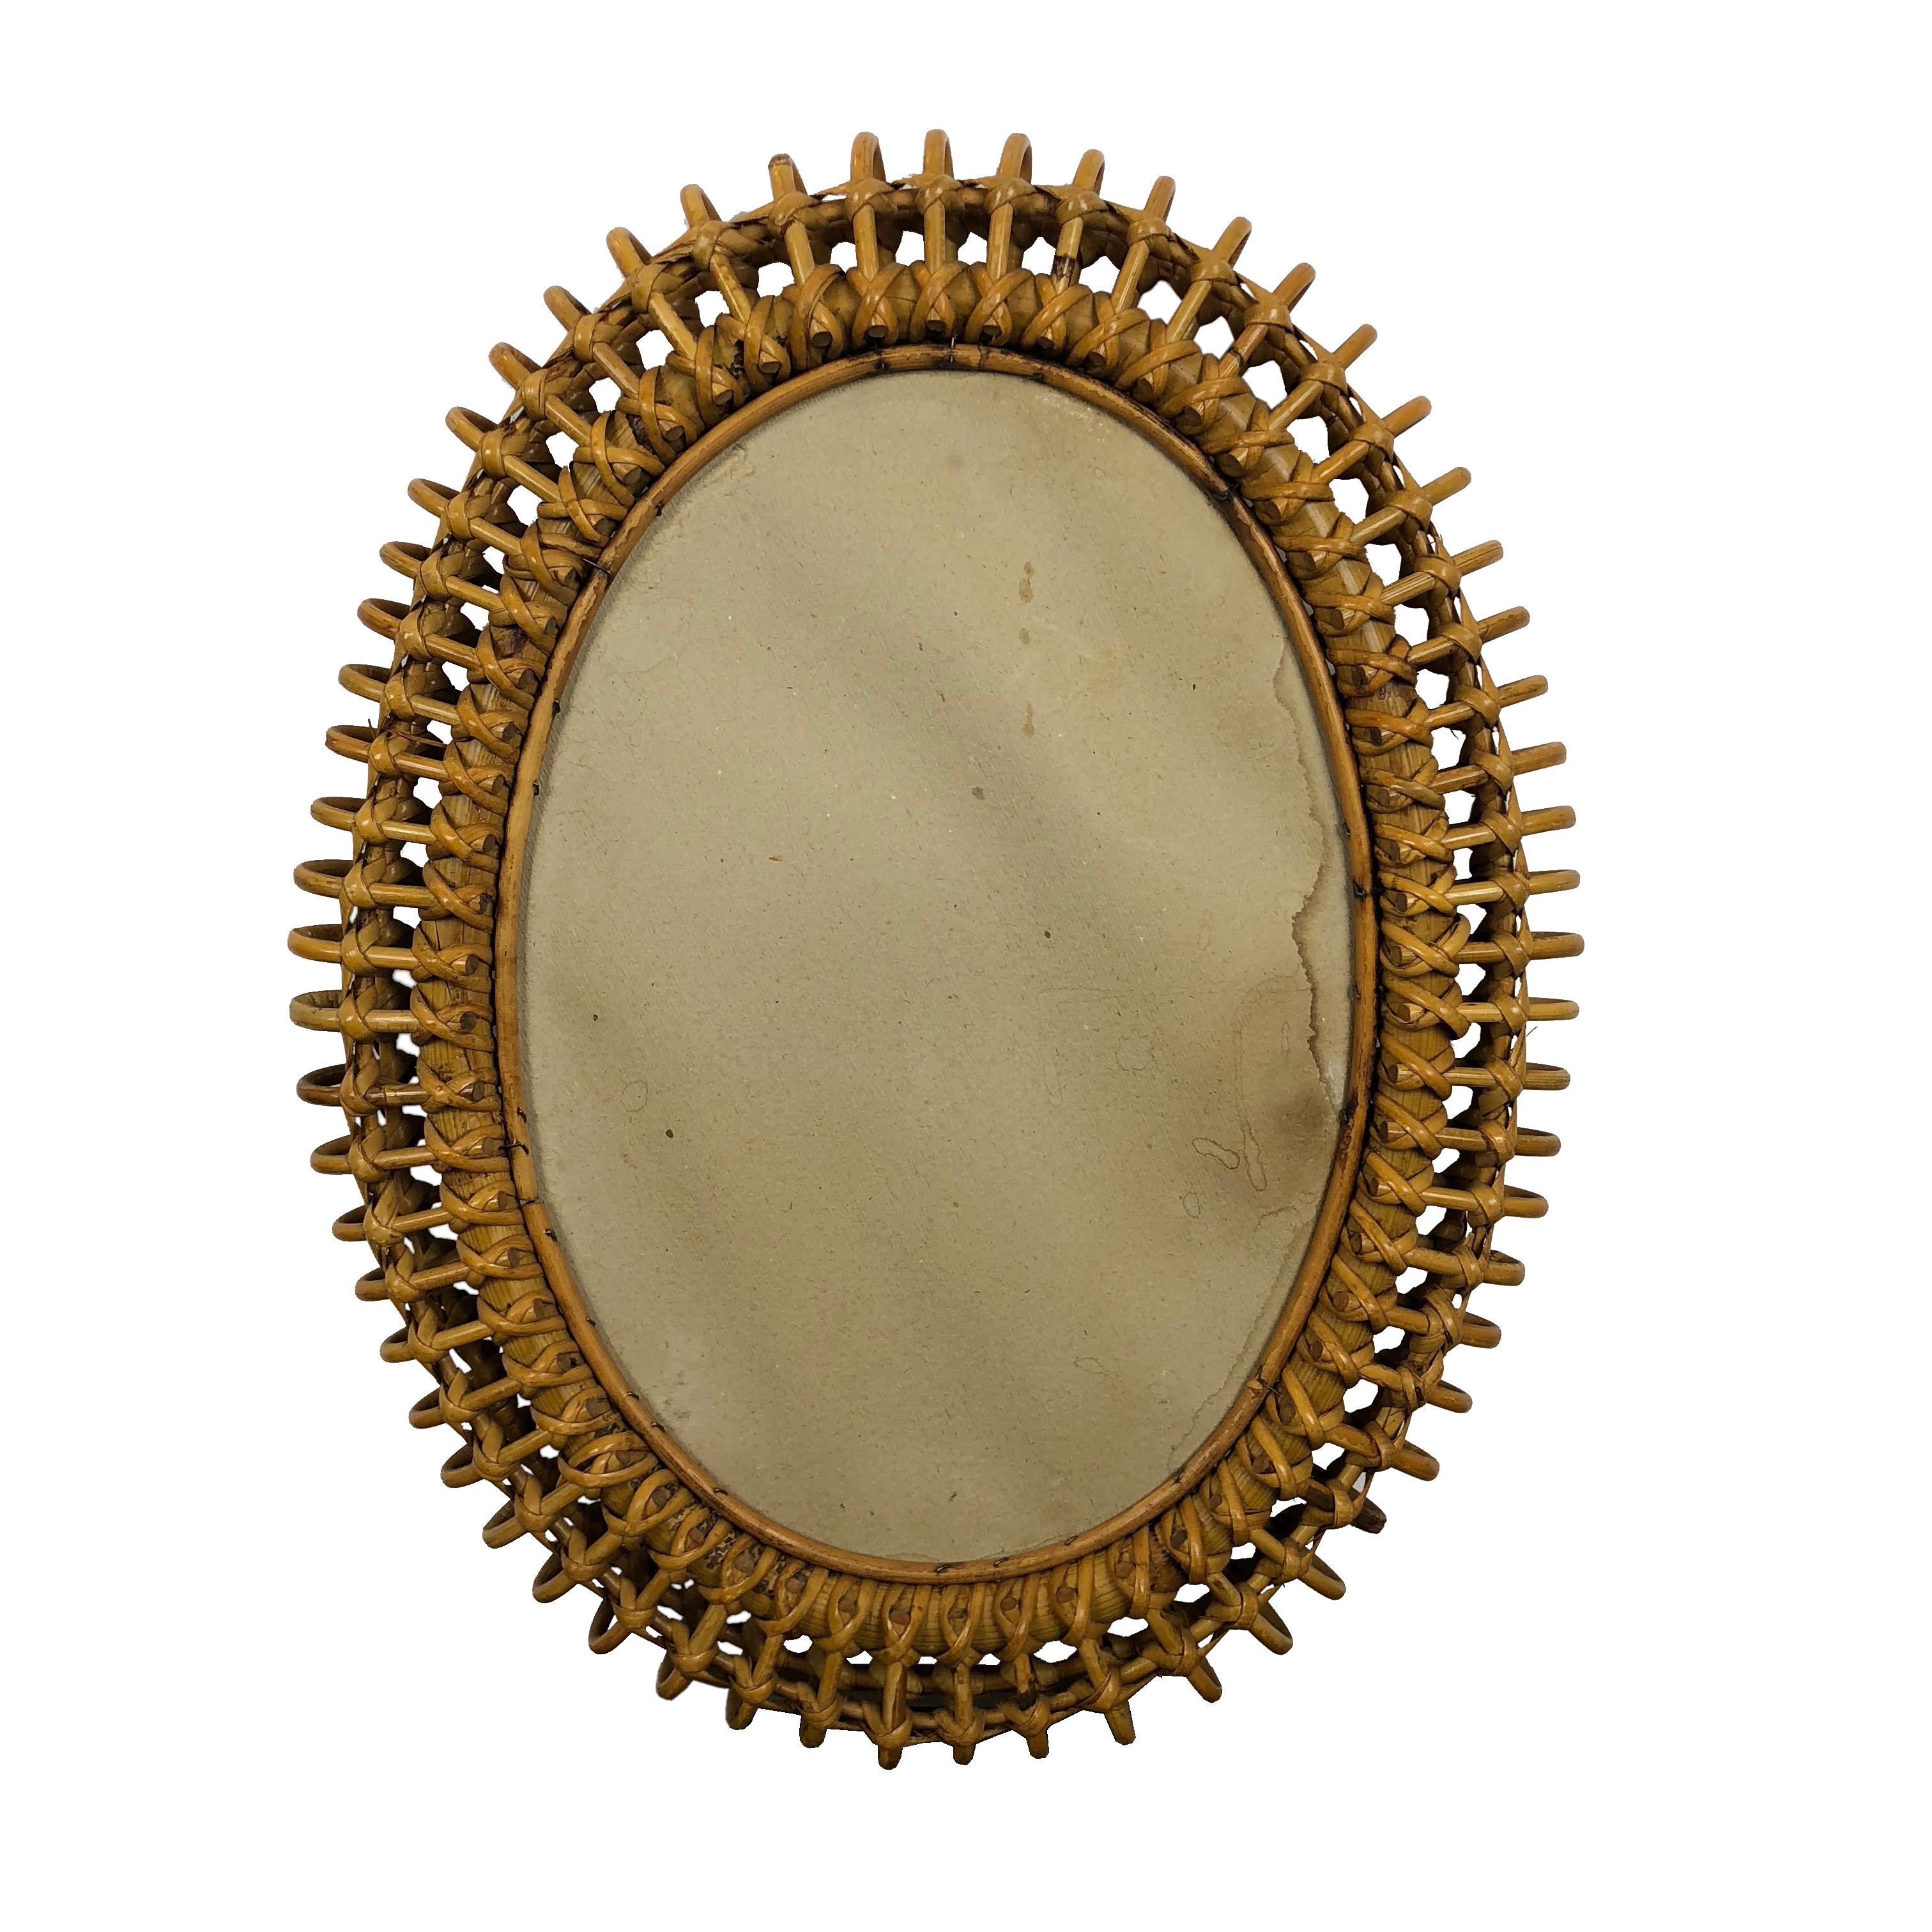 Italian Oval Wall Mirror in Bamboo and Rattan, 1960s Midcentury, Italy